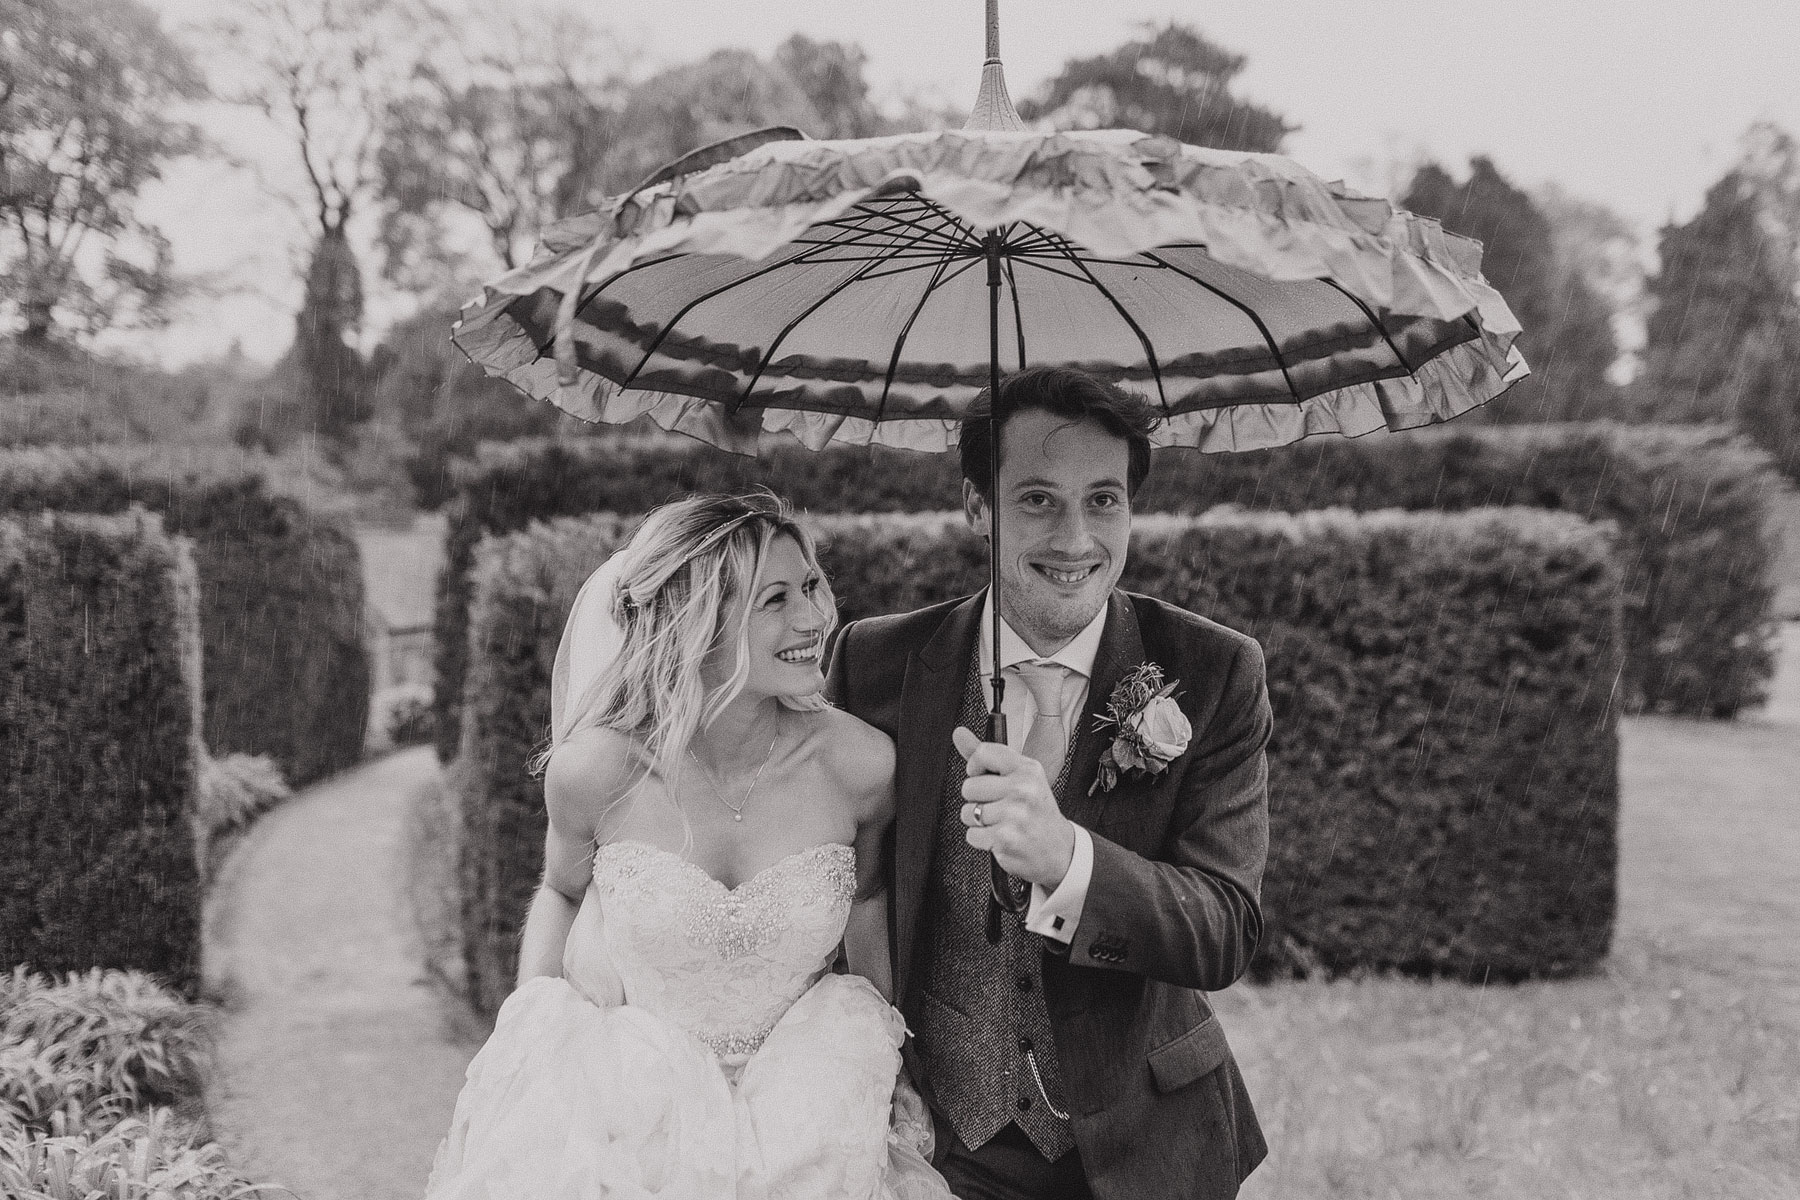 rain on your wedding day with a bride and groom holding an umbrella